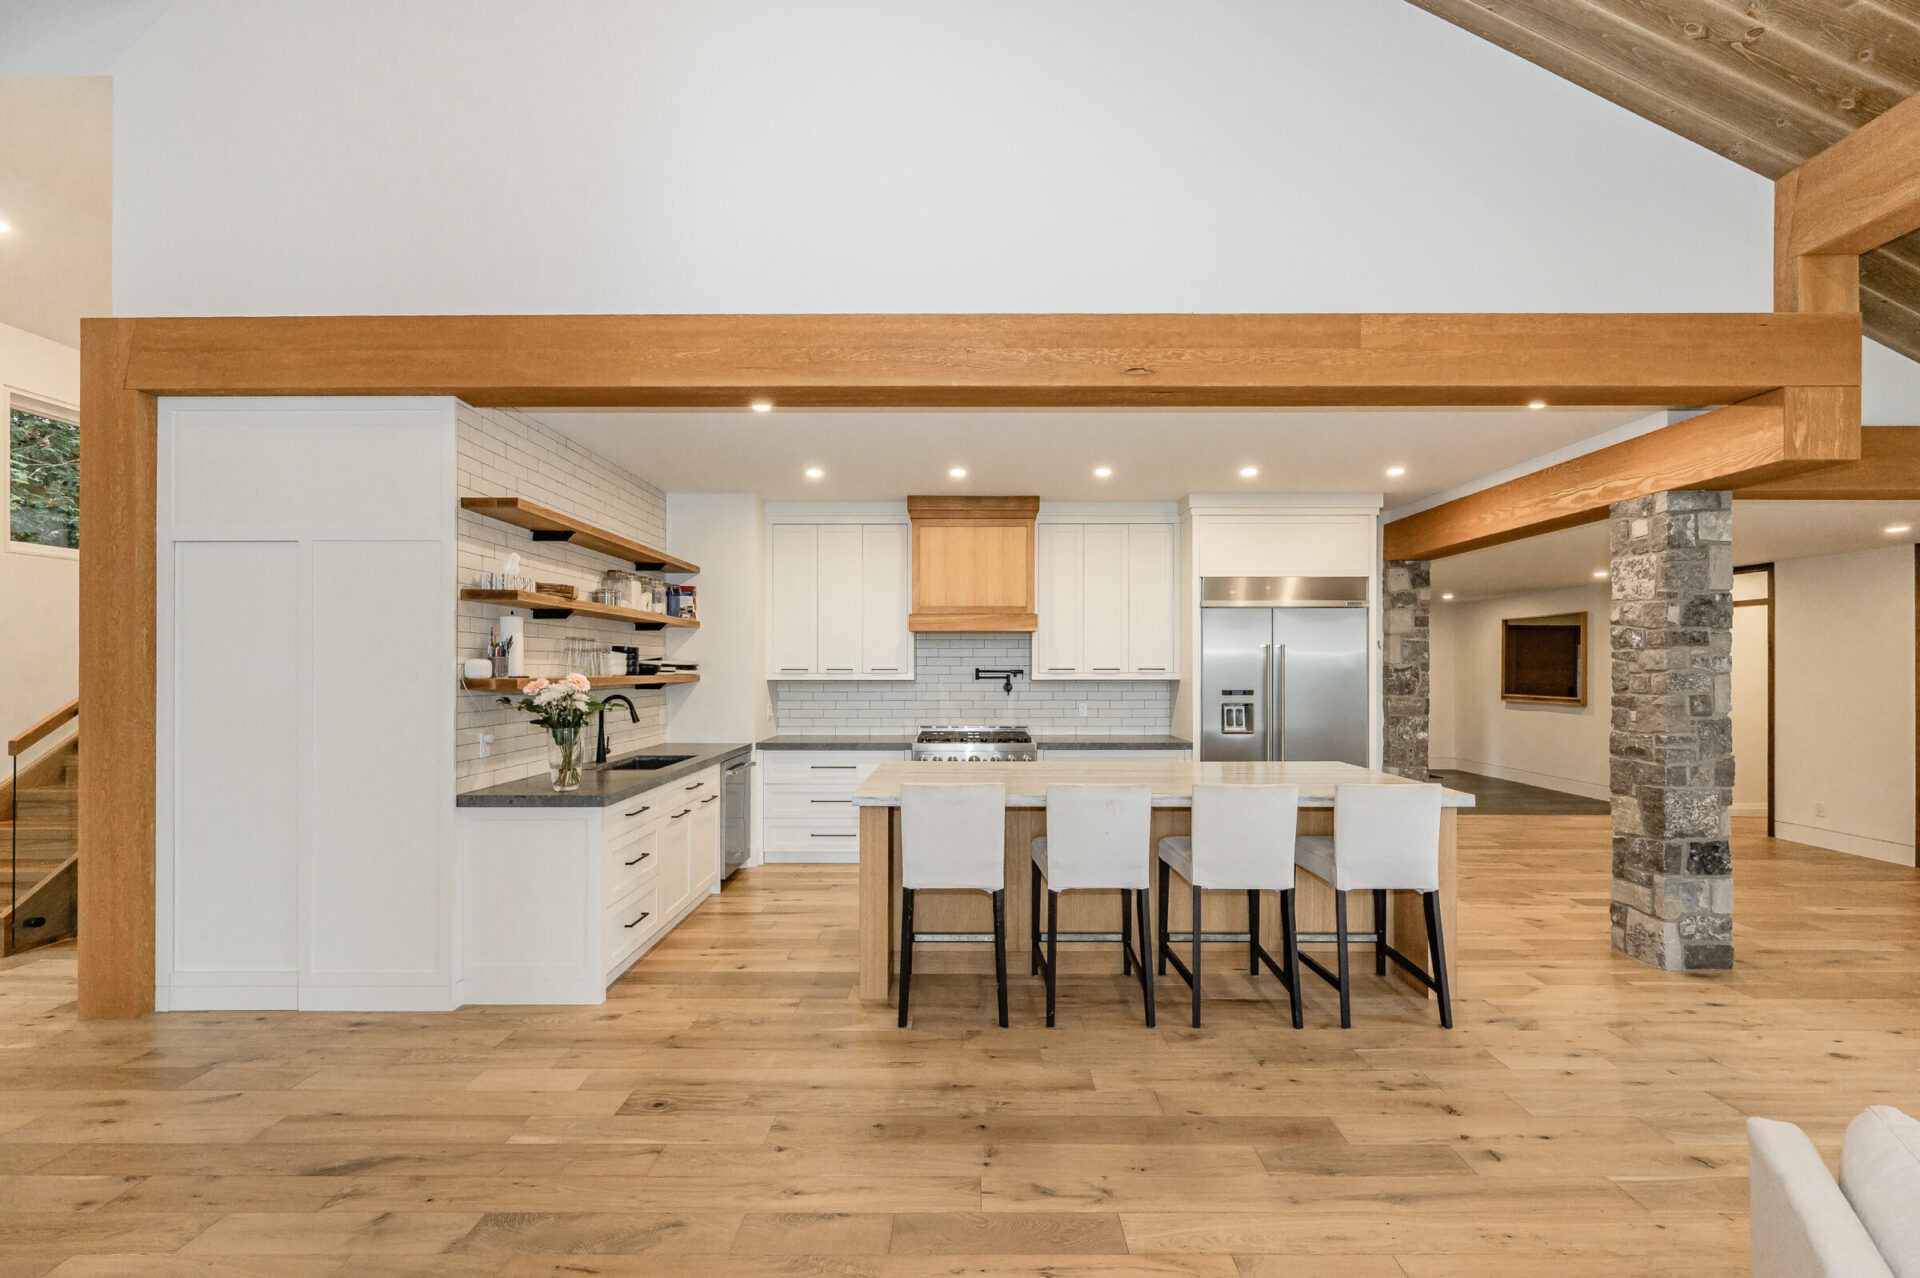 A spacious modern kitchen with white cabinets, stainless steel appliances, wooden beams, a stone column, and a central island with bar stools.